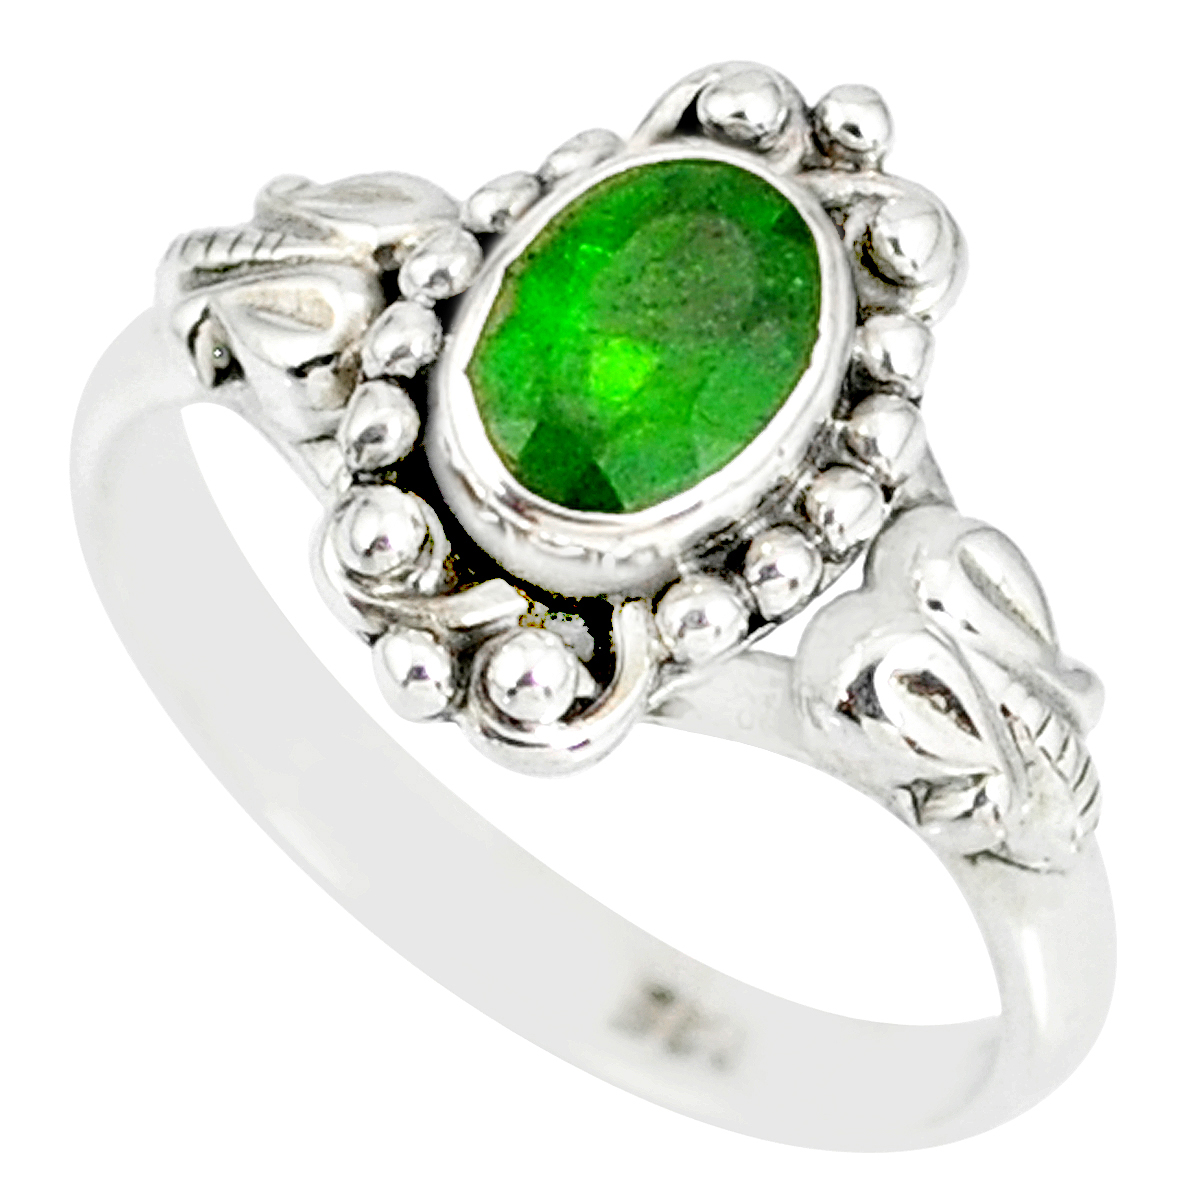 Details about   Chrome Diopside Gemstone Jewelry Rose Color 925 Sterling Silver Ring 